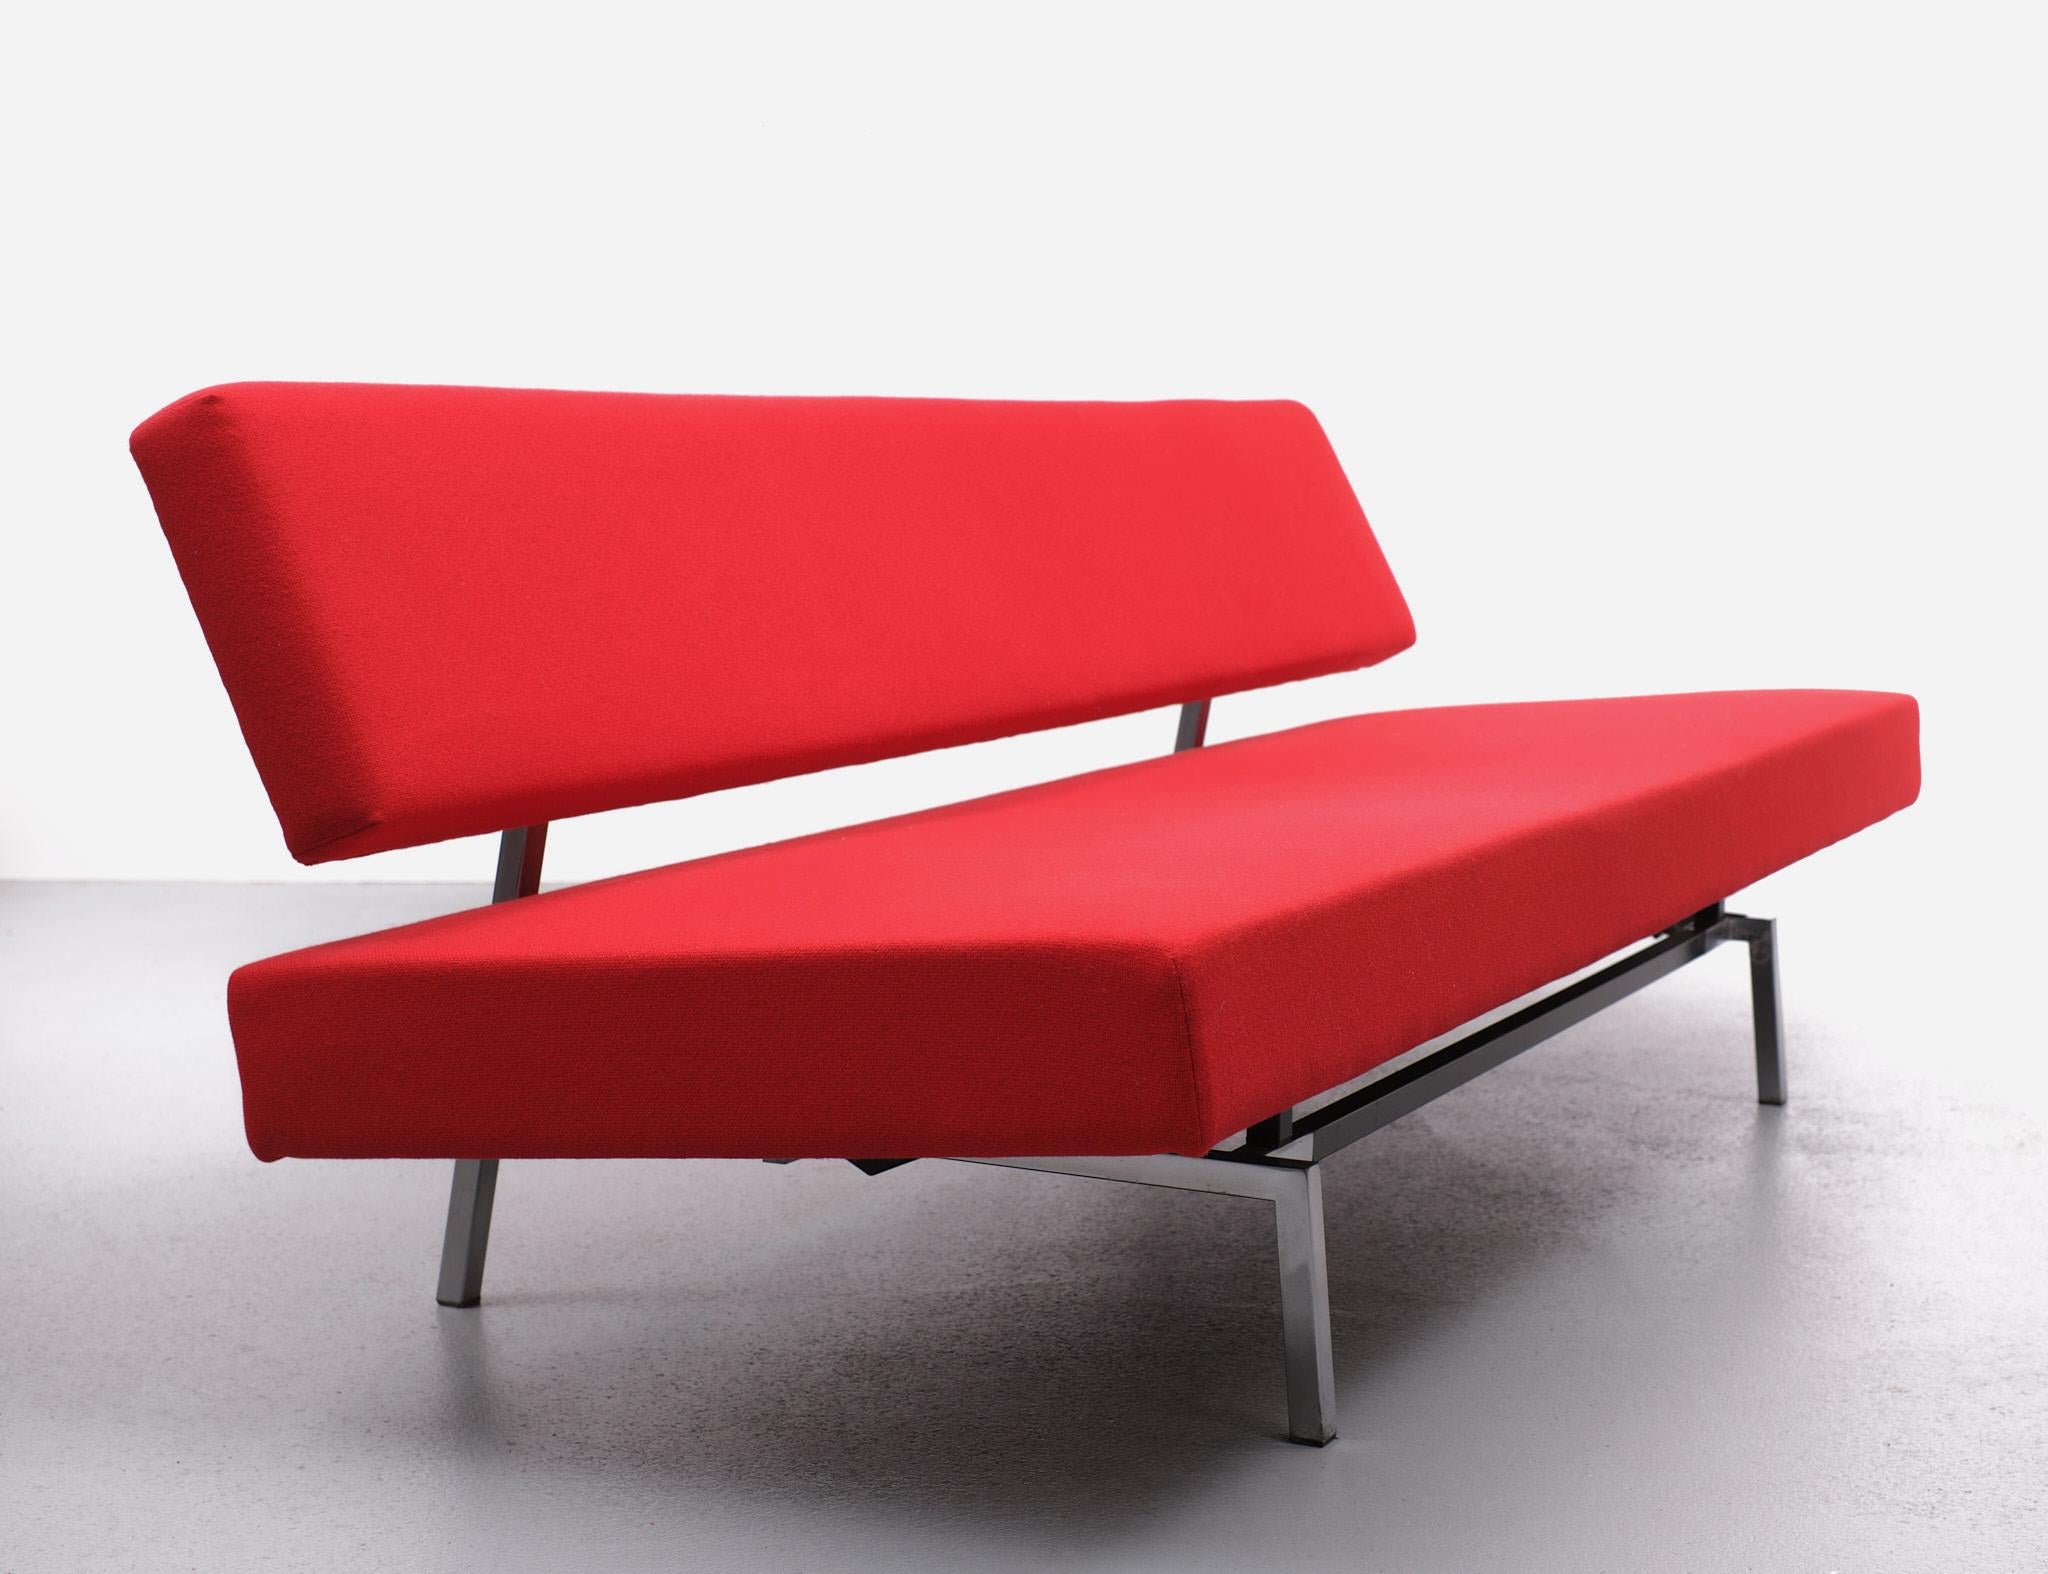 Wonderful Dutch Minimalist modern design sofa / daybed model ''BR03'' designed by Martin Visser for Spectrum 1960s, The Netherlands. 
Magnificent Minimalist design with black metal frame with newly upholstered Bright Red wool fabric seating and